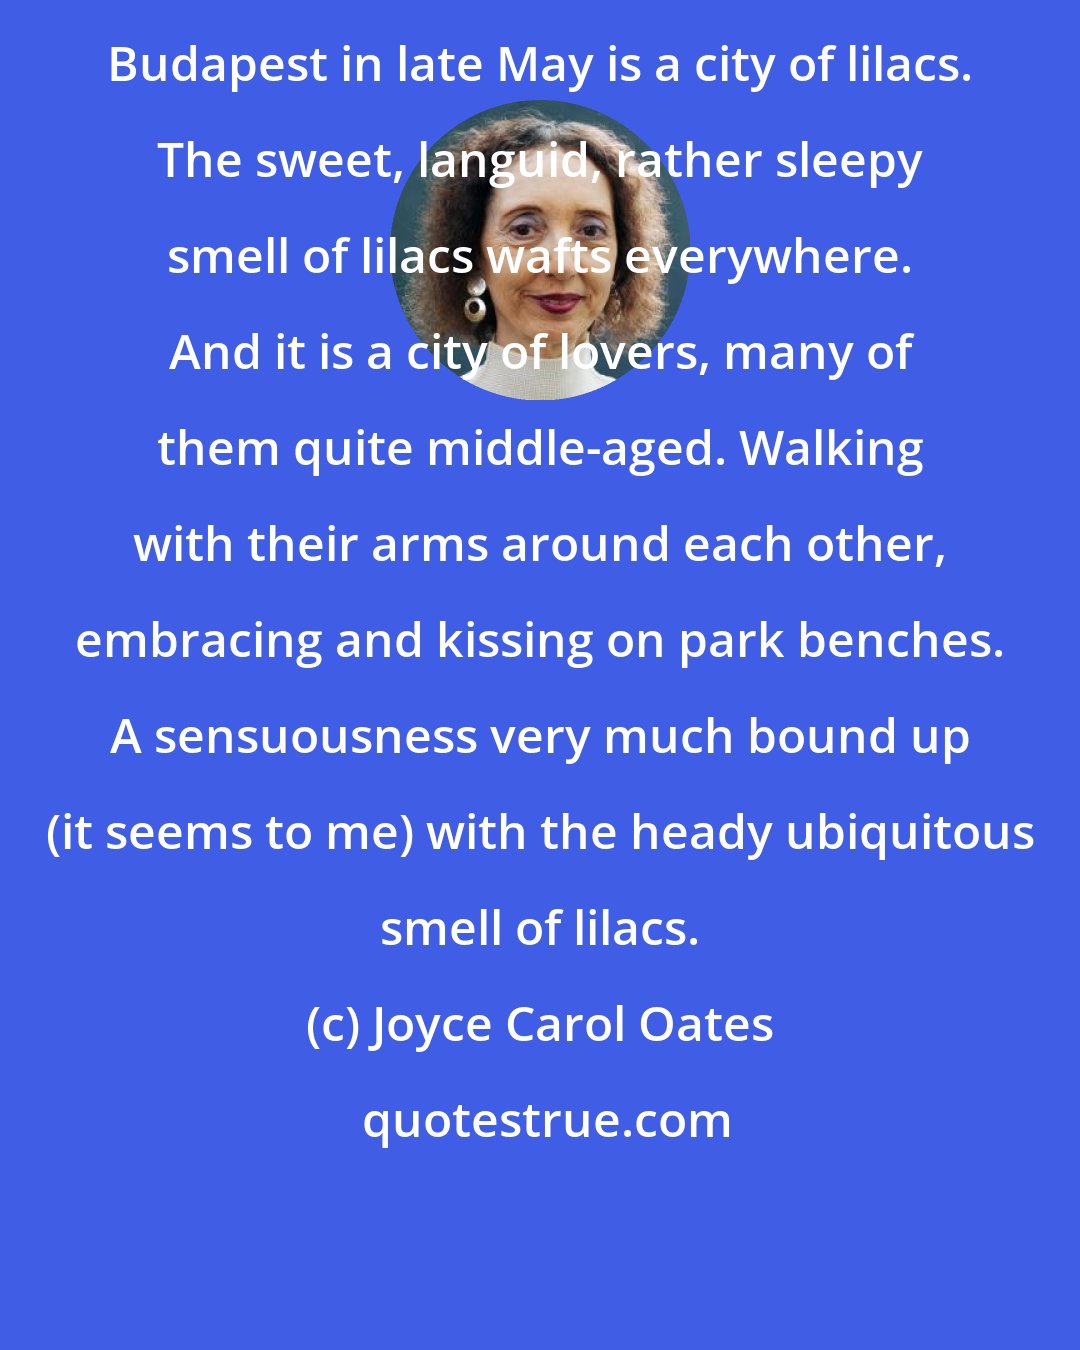 Joyce Carol Oates: Budapest in late May is a city of lilacs. The sweet, languid, rather sleepy smell of lilacs wafts everywhere. And it is a city of lovers, many of them quite middle-aged. Walking with their arms around each other, embracing and kissing on park benches. A sensuousness very much bound up (it seems to me) with the heady ubiquitous smell of lilacs.